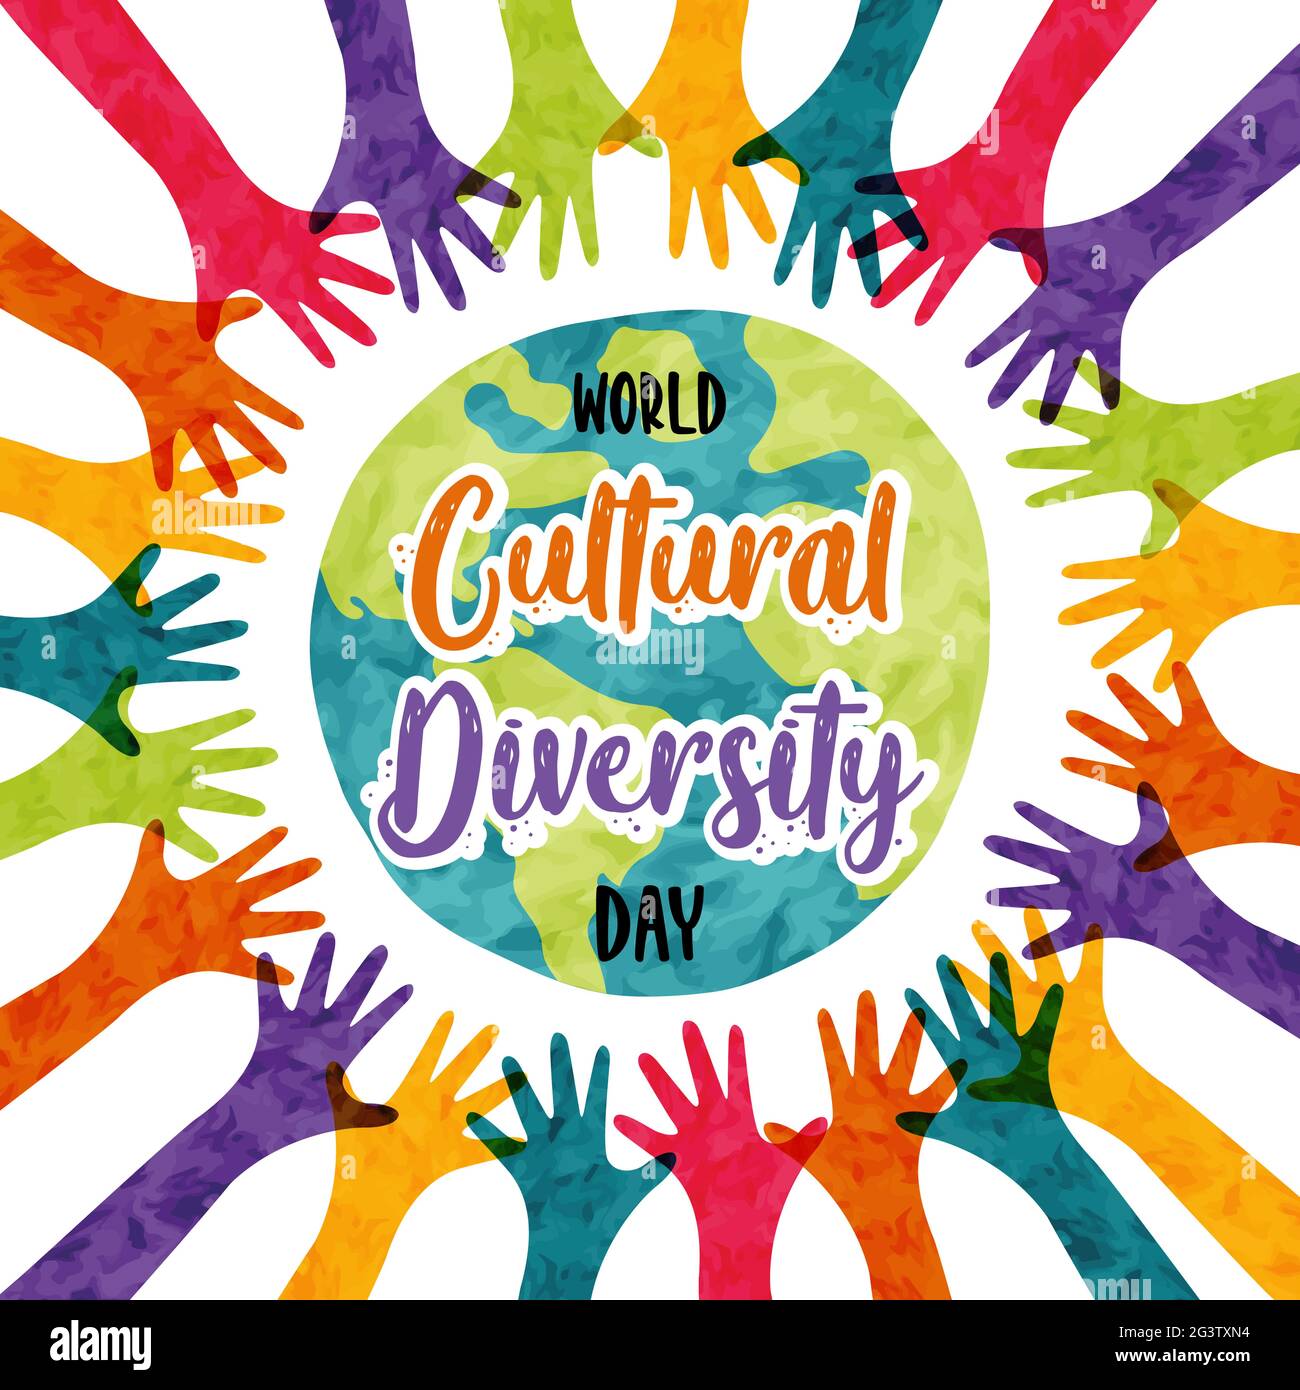 World Cultural Diversity Day greeting card illustration of colorful people hands raised up together. International culture social help concept. 21 may Stock Vector